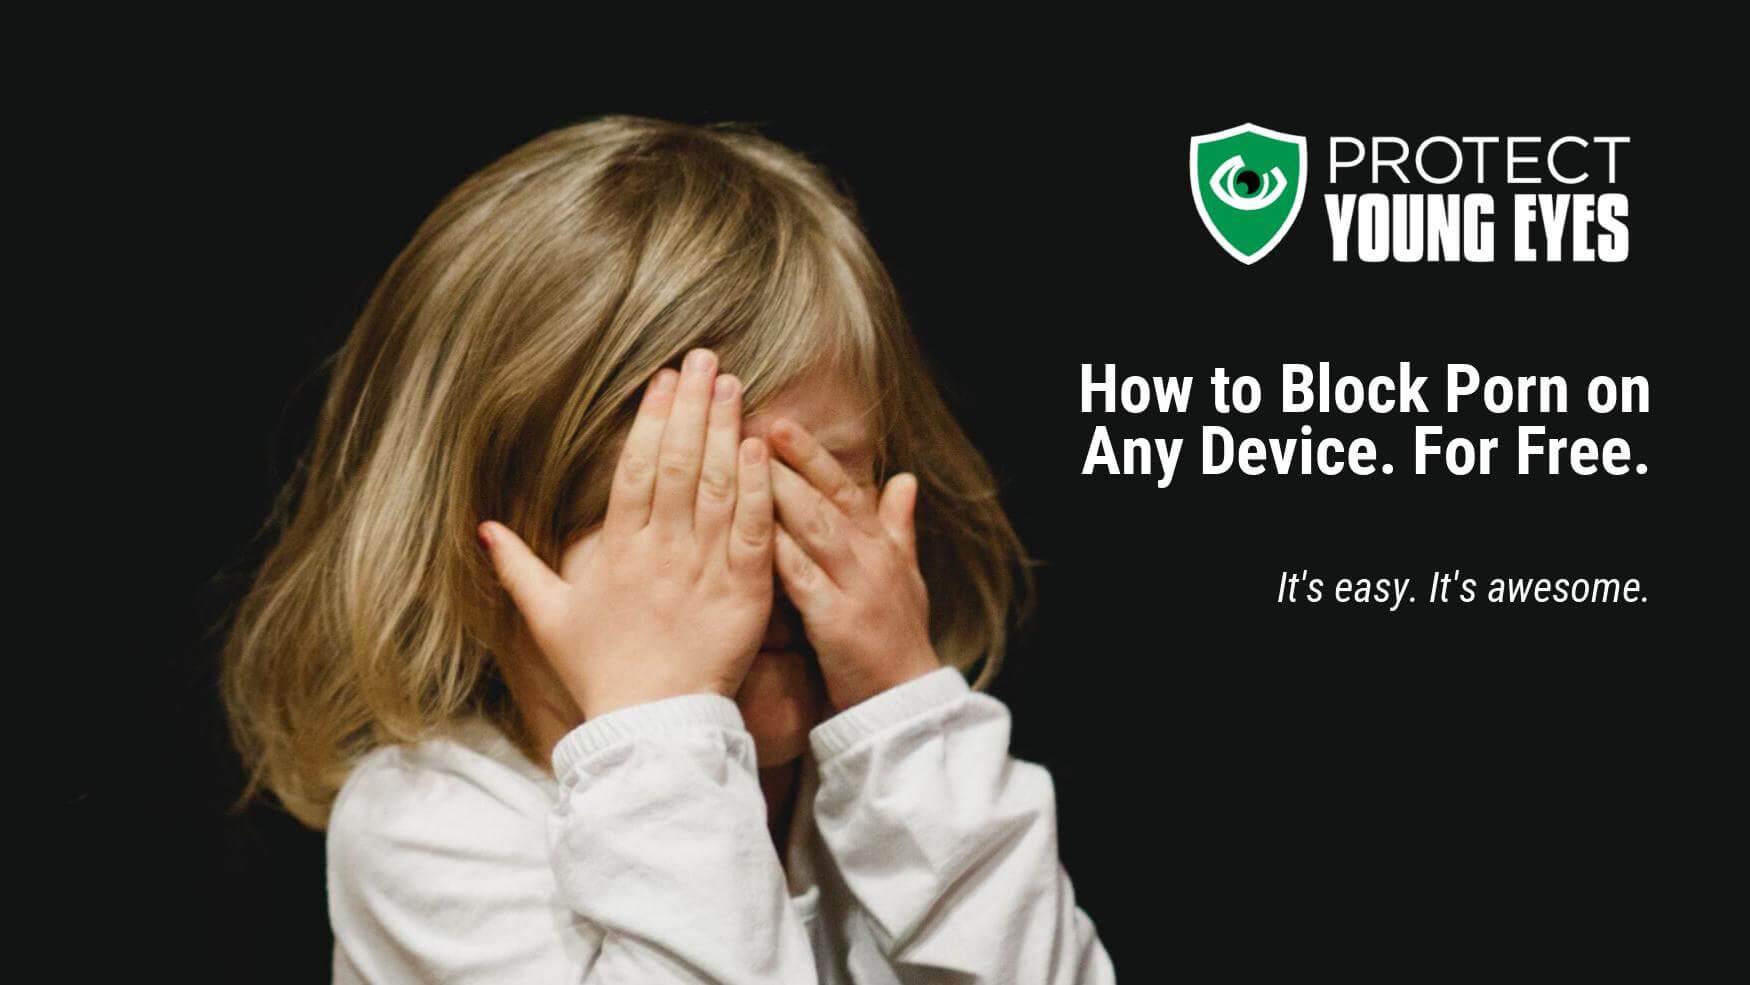 How to Block Porn on Any Device. For Free. A Protect Young Eyes Post.